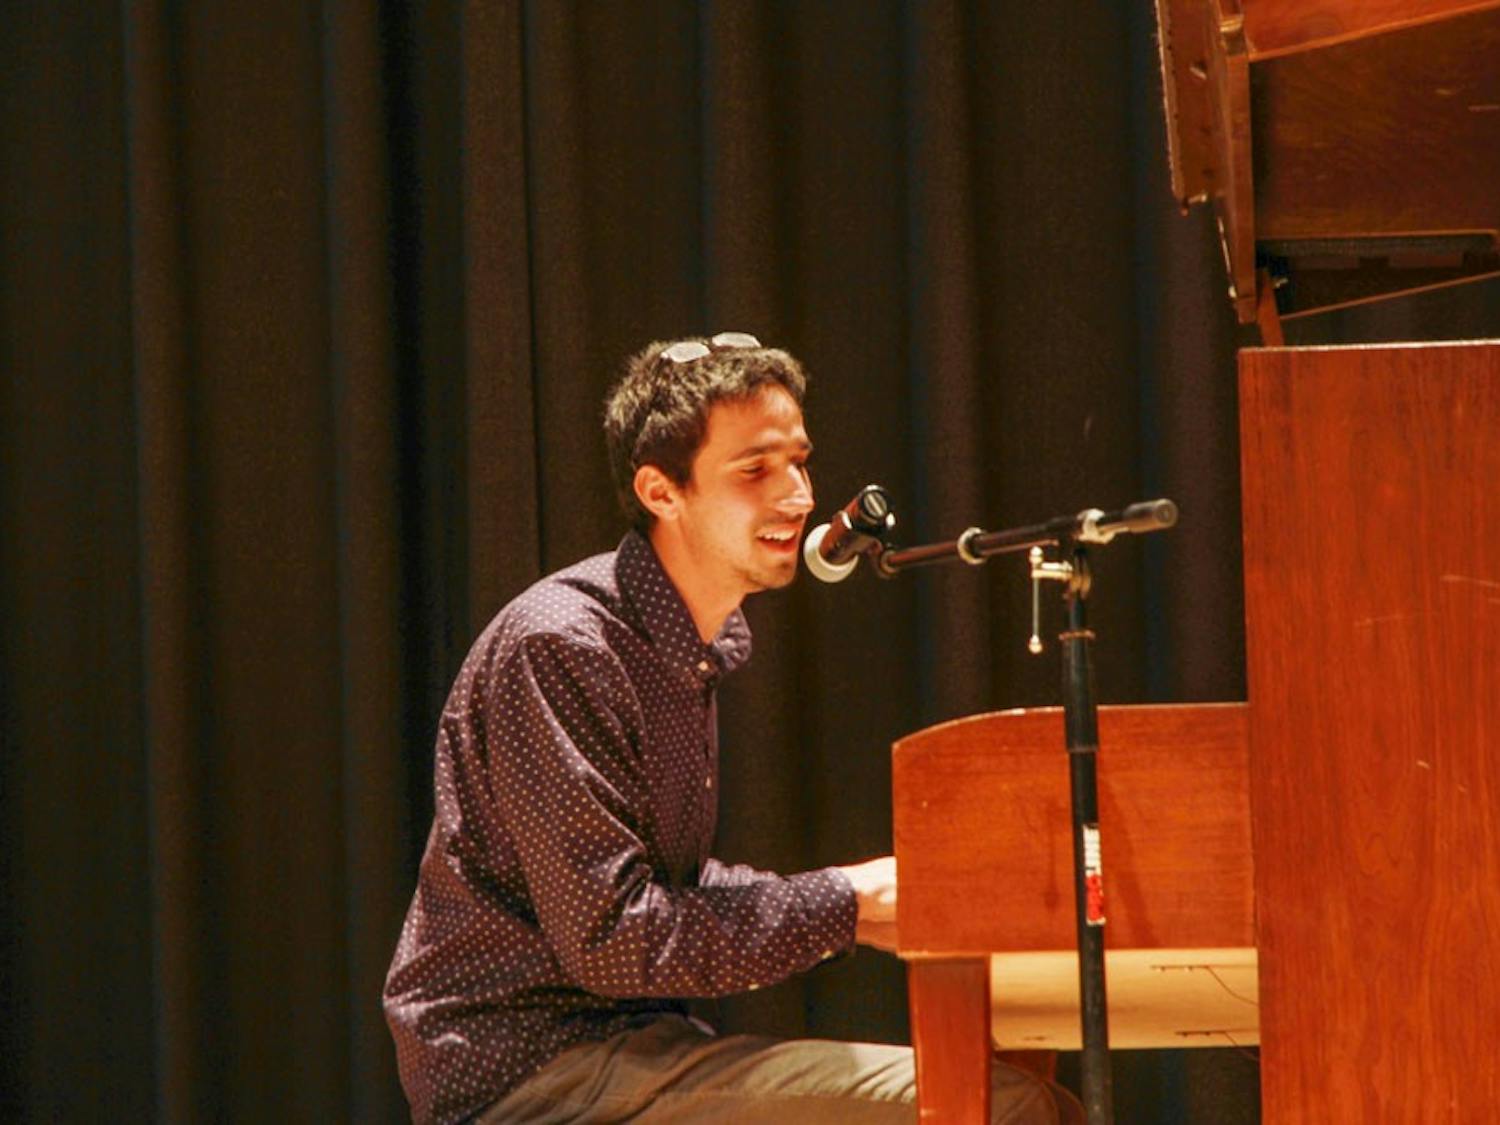 On Tuesday, the UB Piano Club hosted its first club event of the year, a concert in SU theatre. The concert was open to any musicians. Paul Sottnik (pictured) travelled from SUNY Fredonia to take part in the performances.